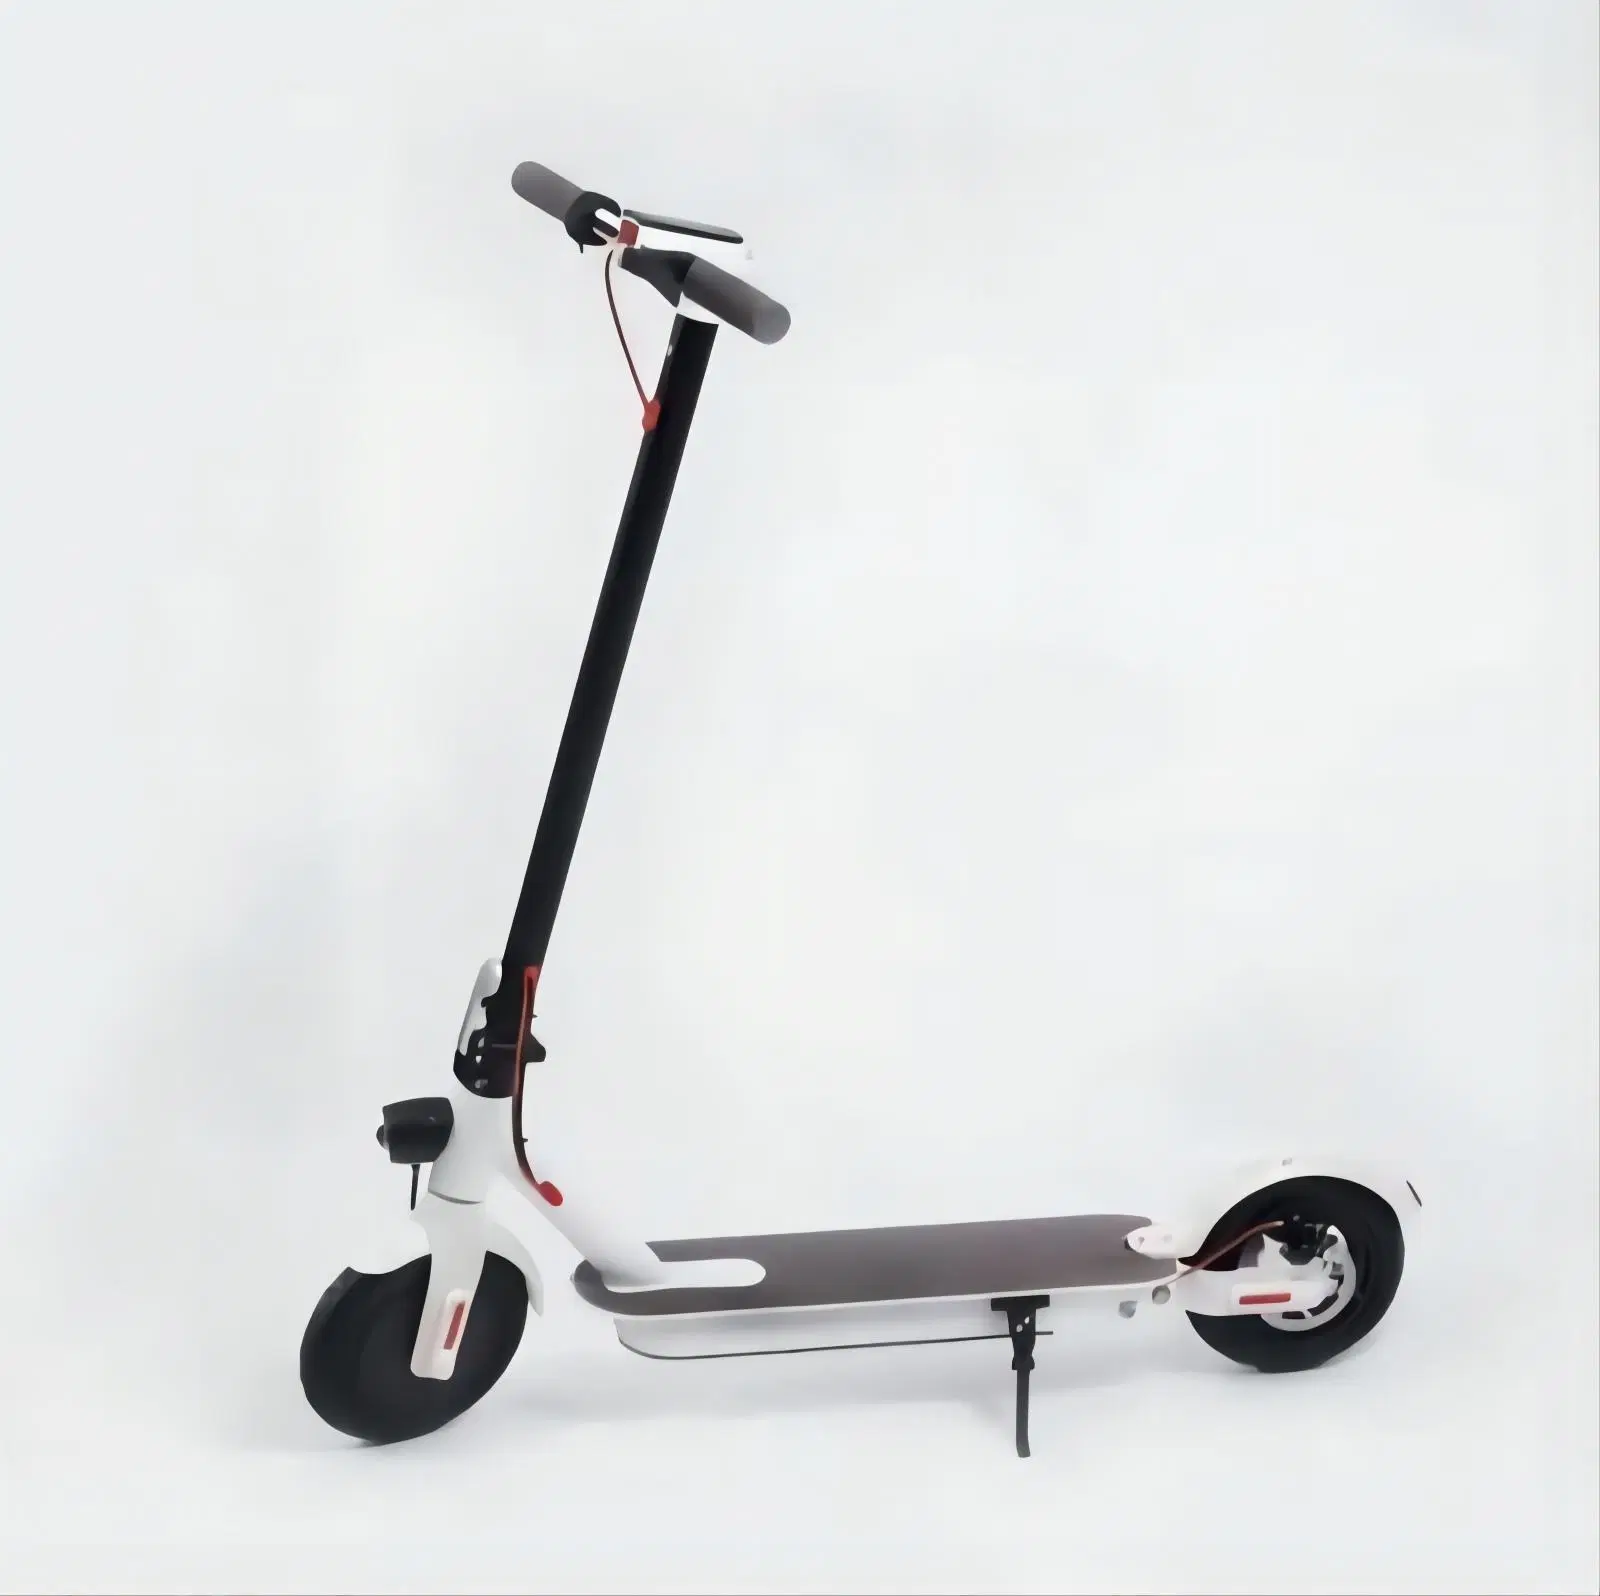 40V Max-Li-ion Battery/Electric-Vehicle/Bike/Bicycle/Scooters-Commuters/Sports-City-E-Scooters